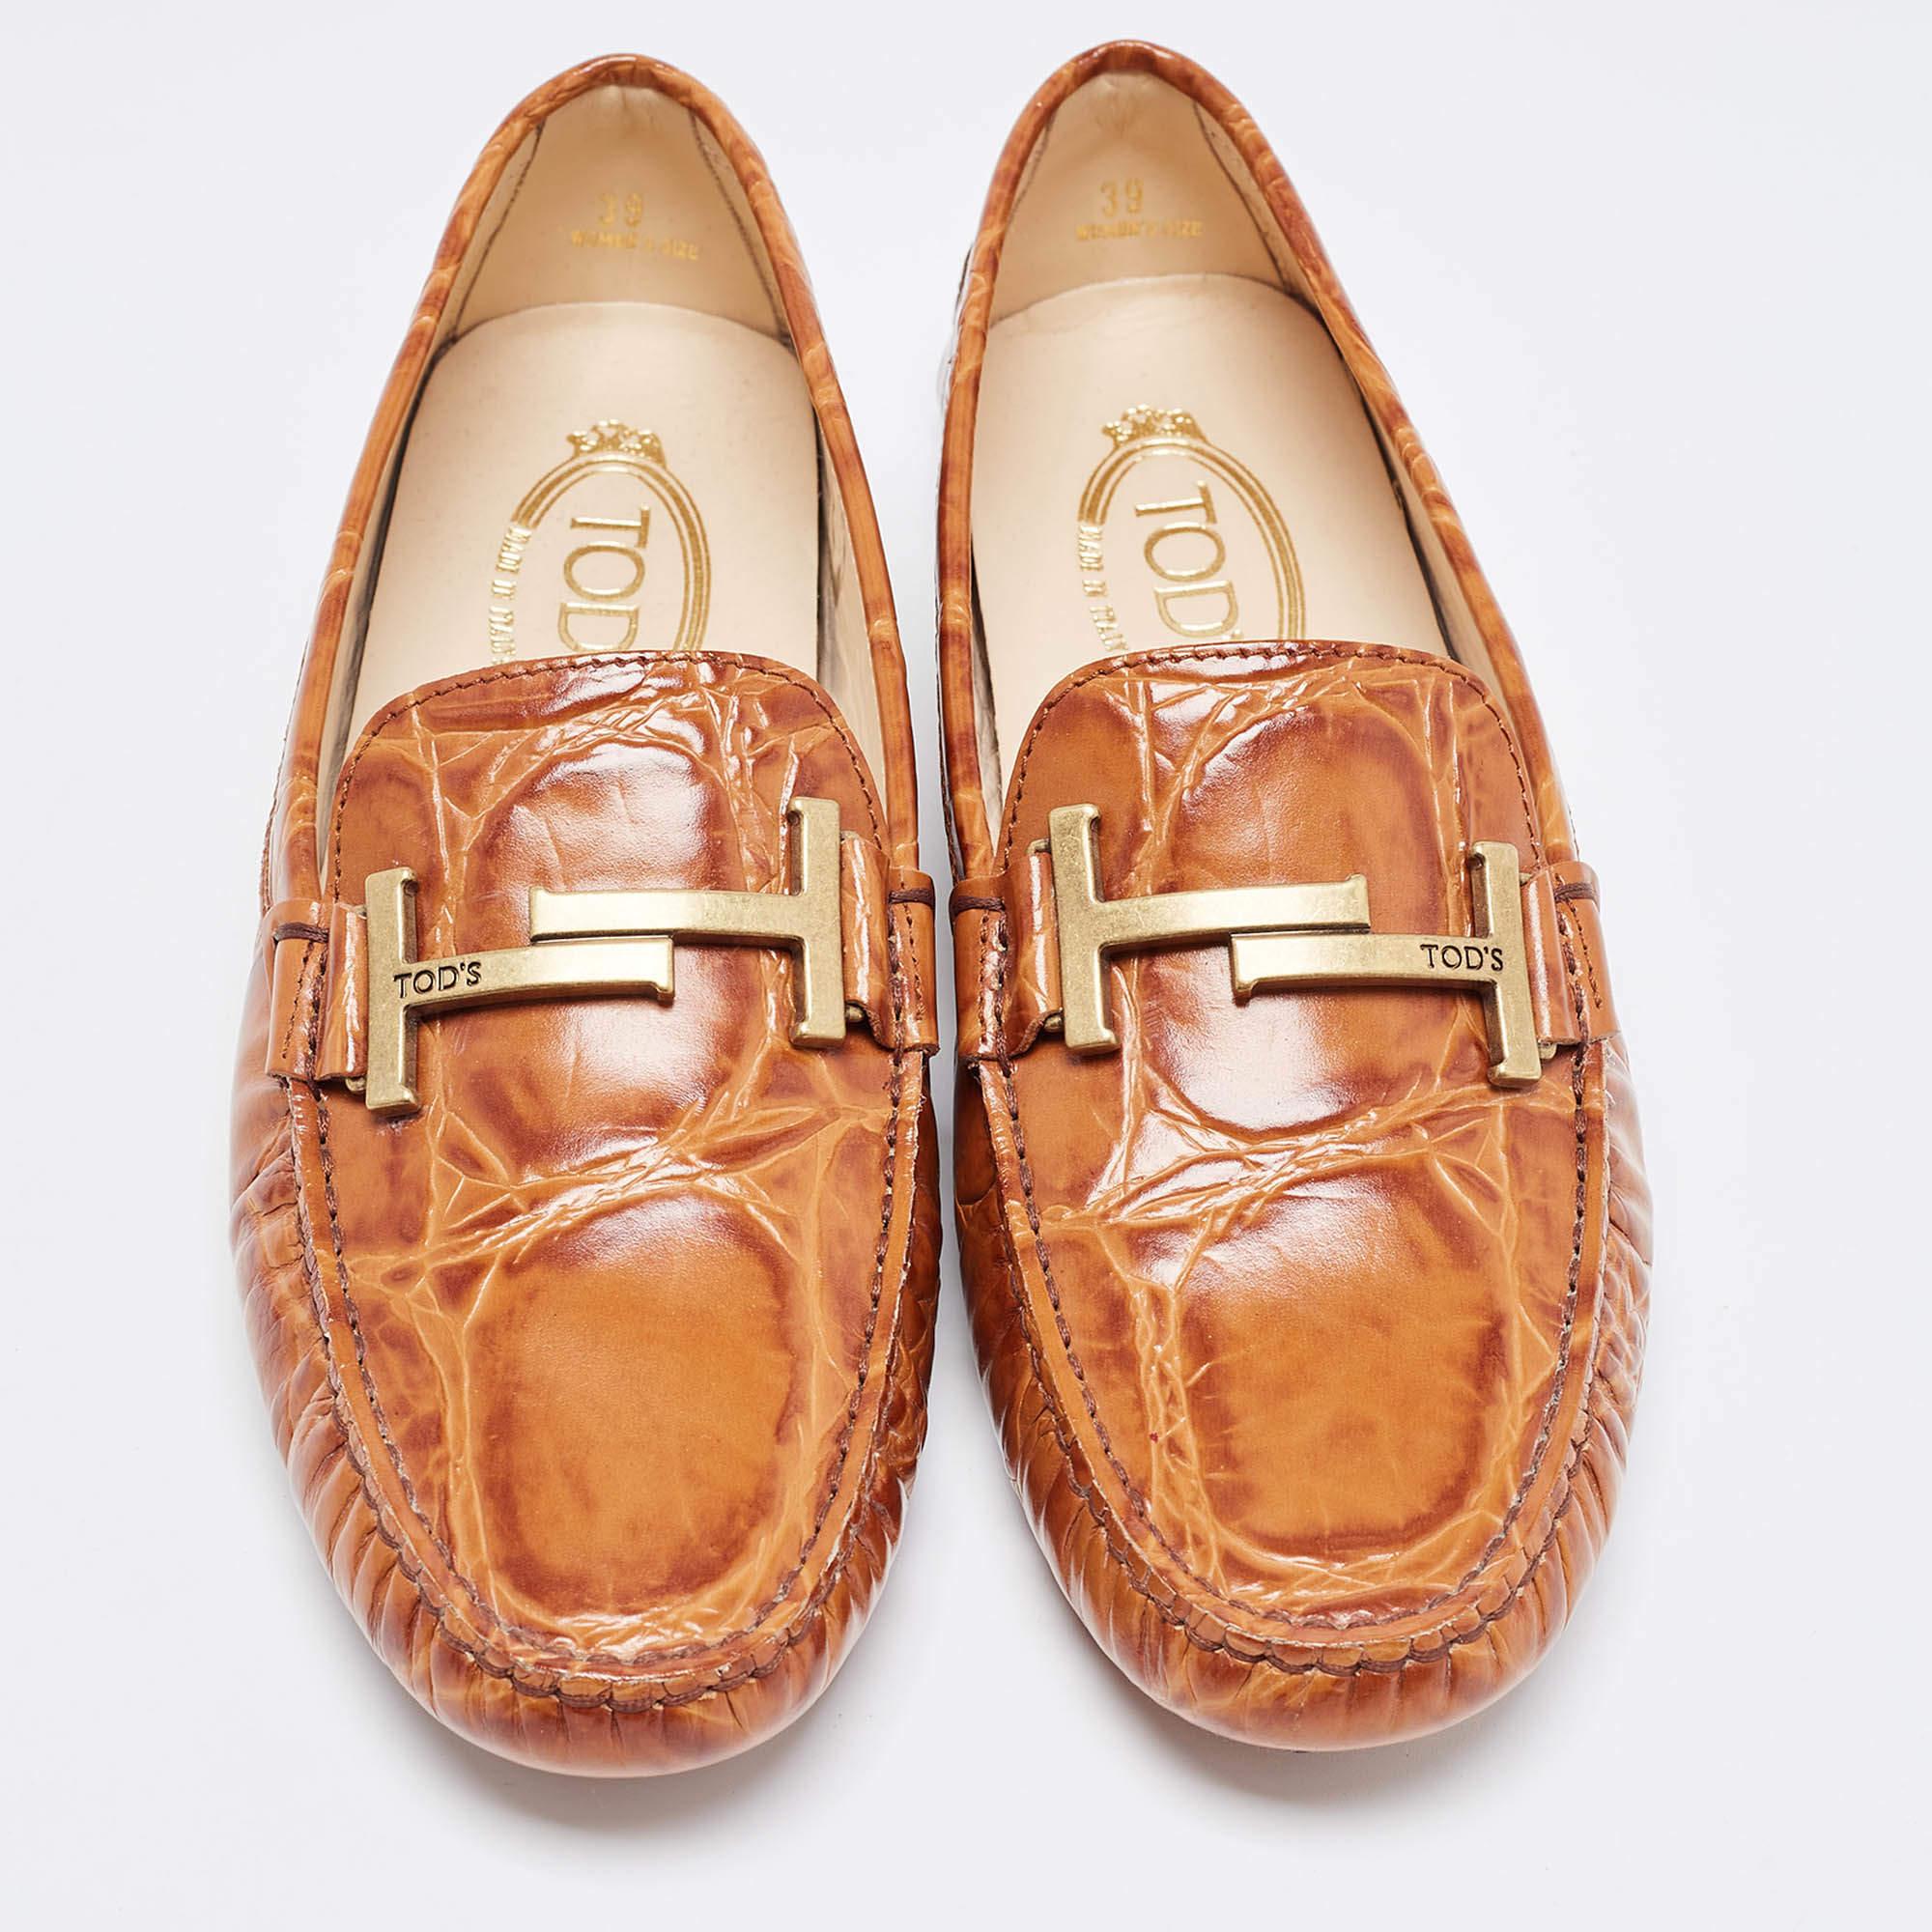 Practical, fashionable, and durable—these designer loafers are carefully built to be fine companions to your everyday style. They come made using the best materials to be a prized buy.

Includes: Original Dustbag, Original Box, Info Booklet

